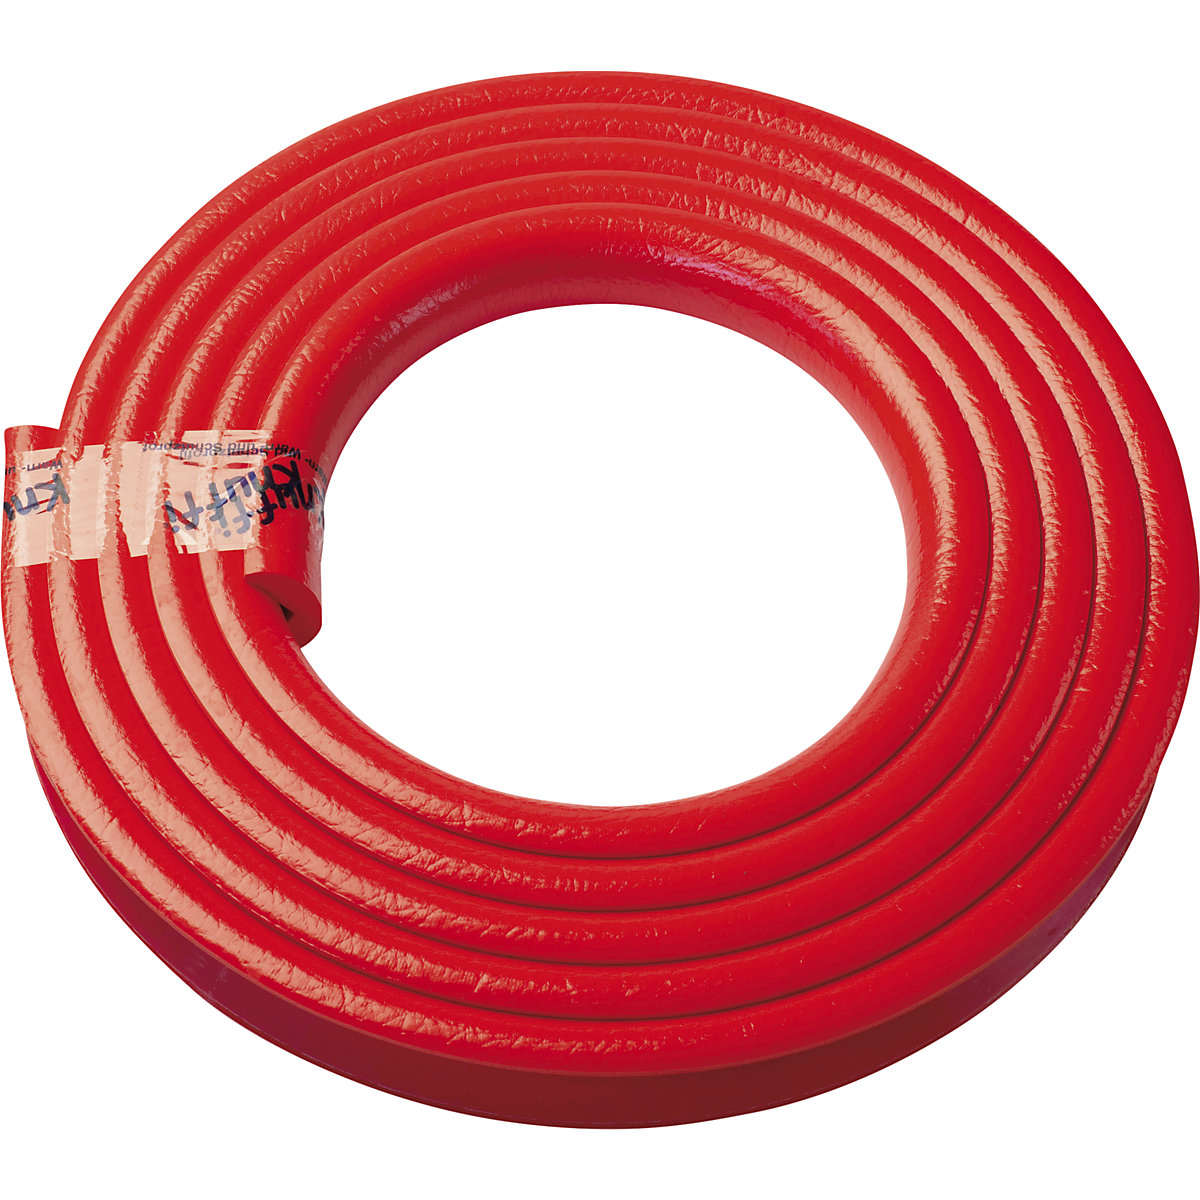 Knuffi® corner protection – SHG, type A, 1 x 5 m roll, red-26